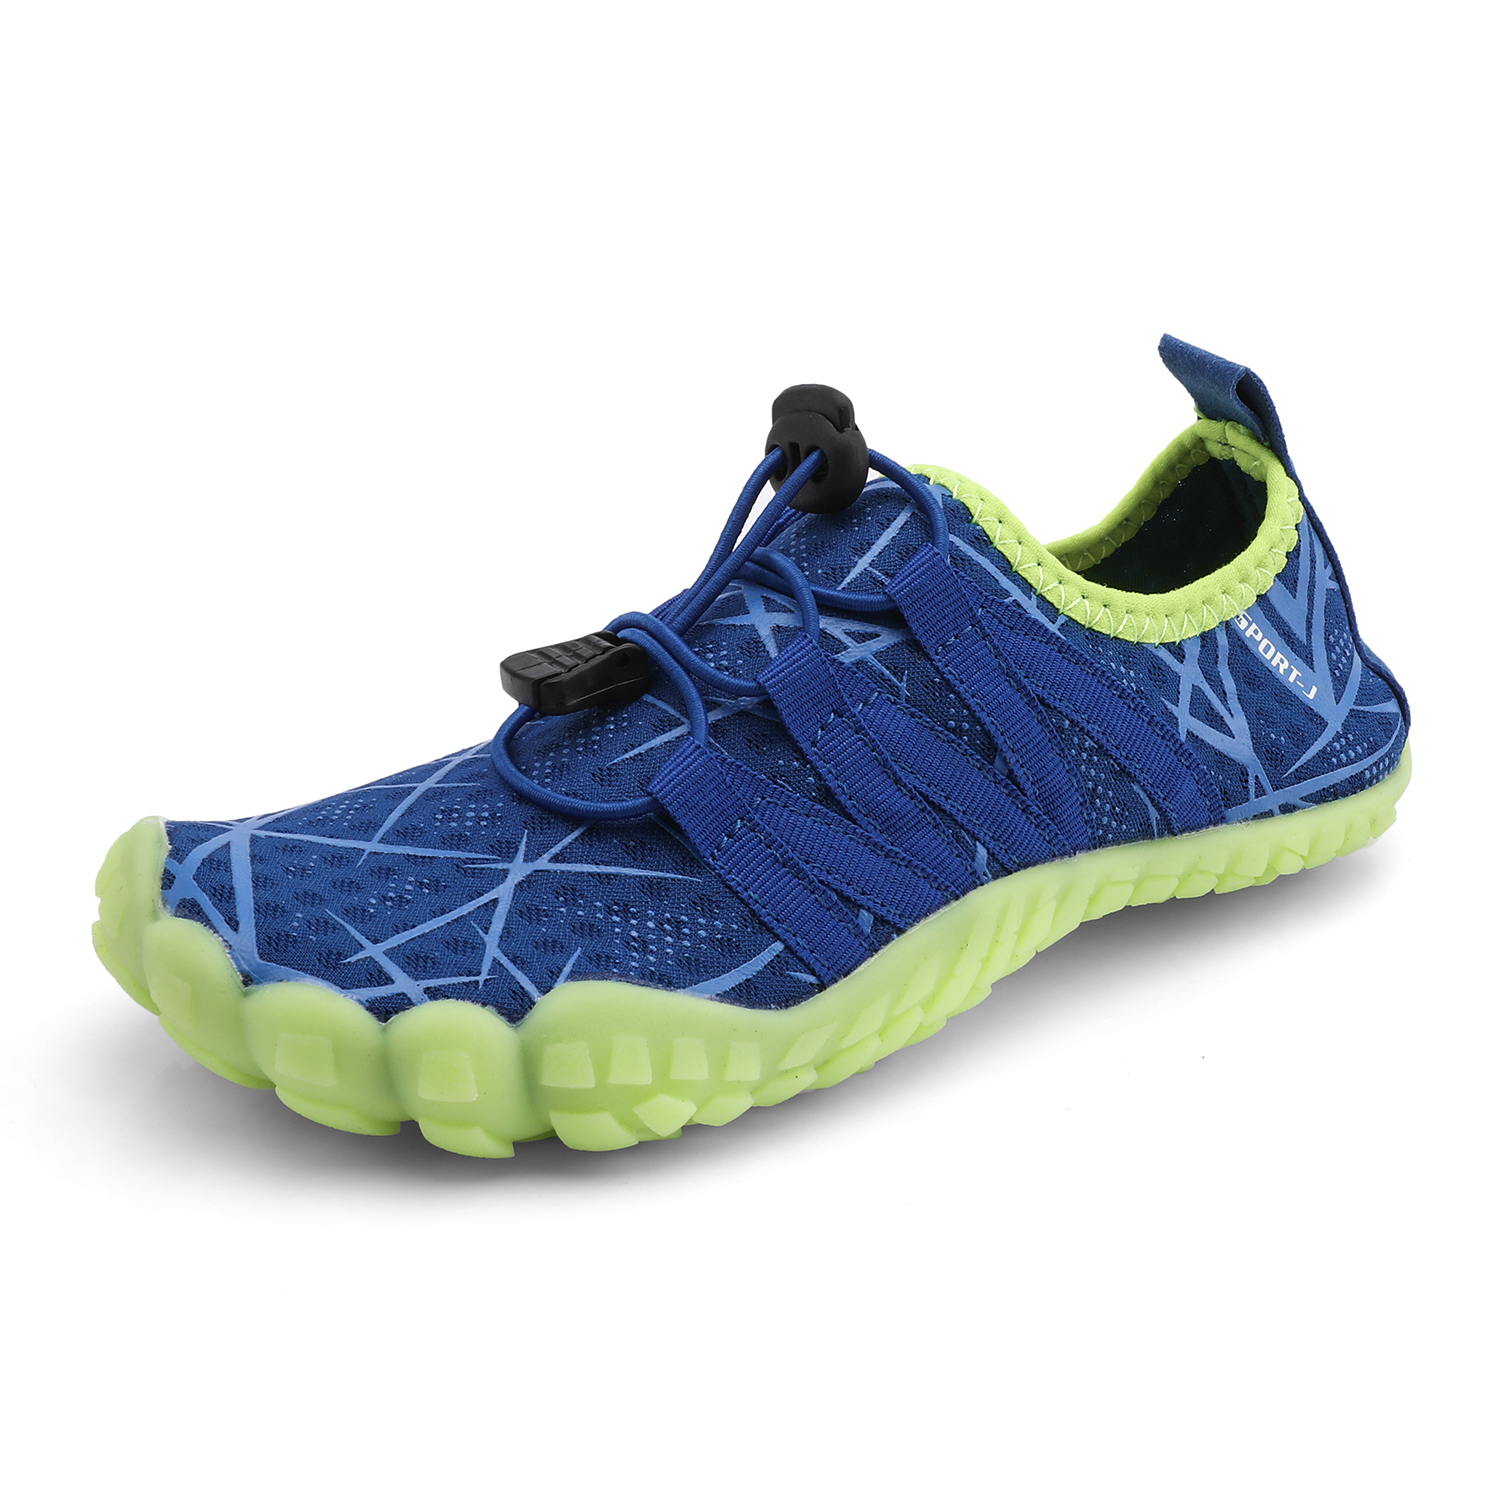 Boys Girls Water Sports Shoes Drainage 